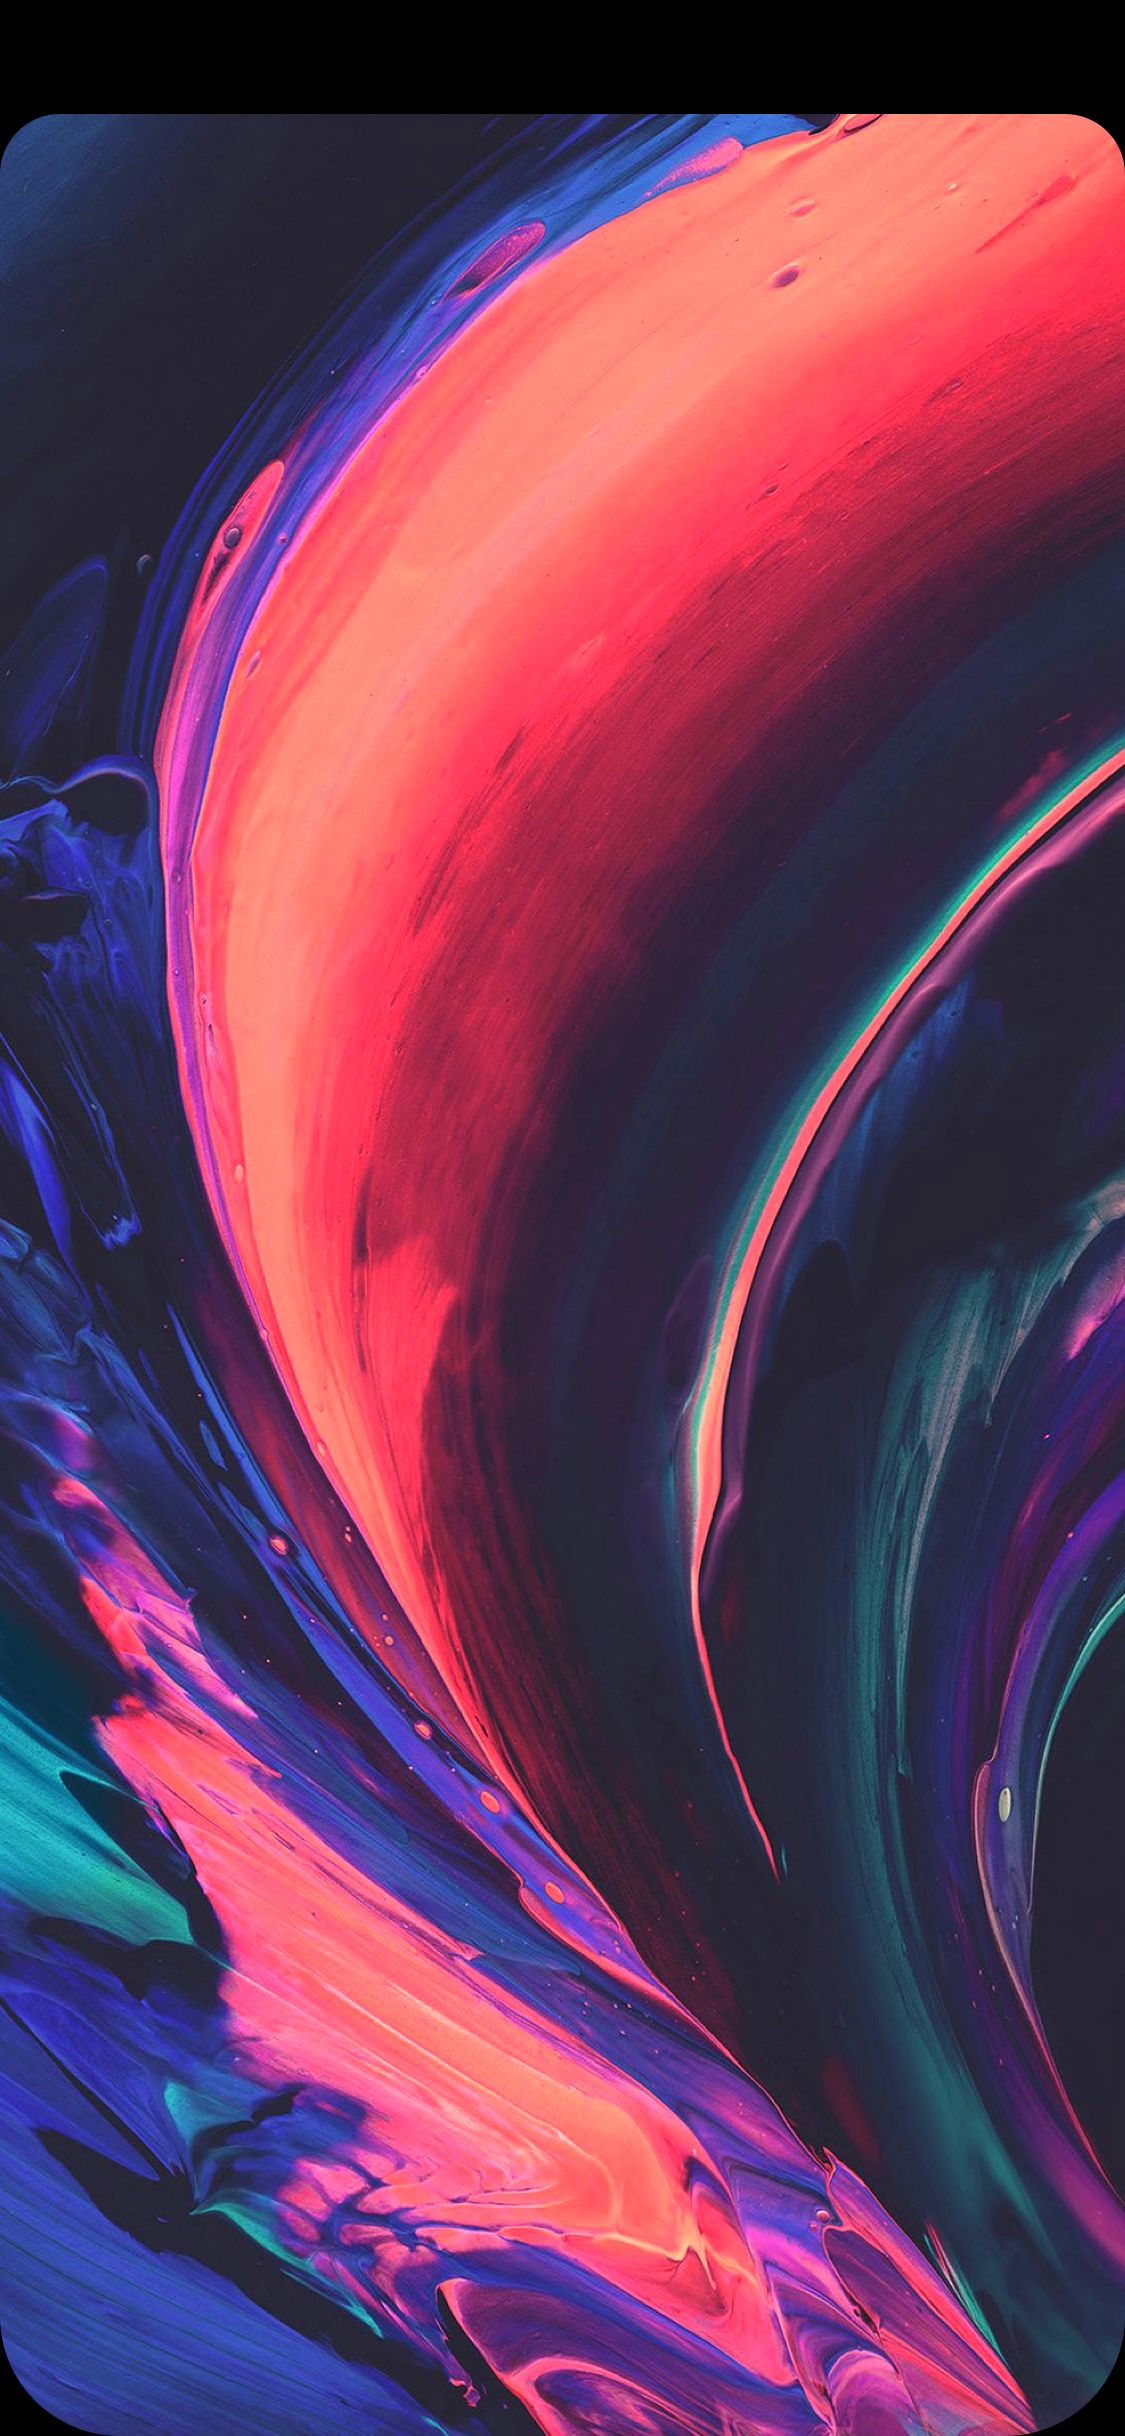 48+] iPhone X Multicolor Wallpapers